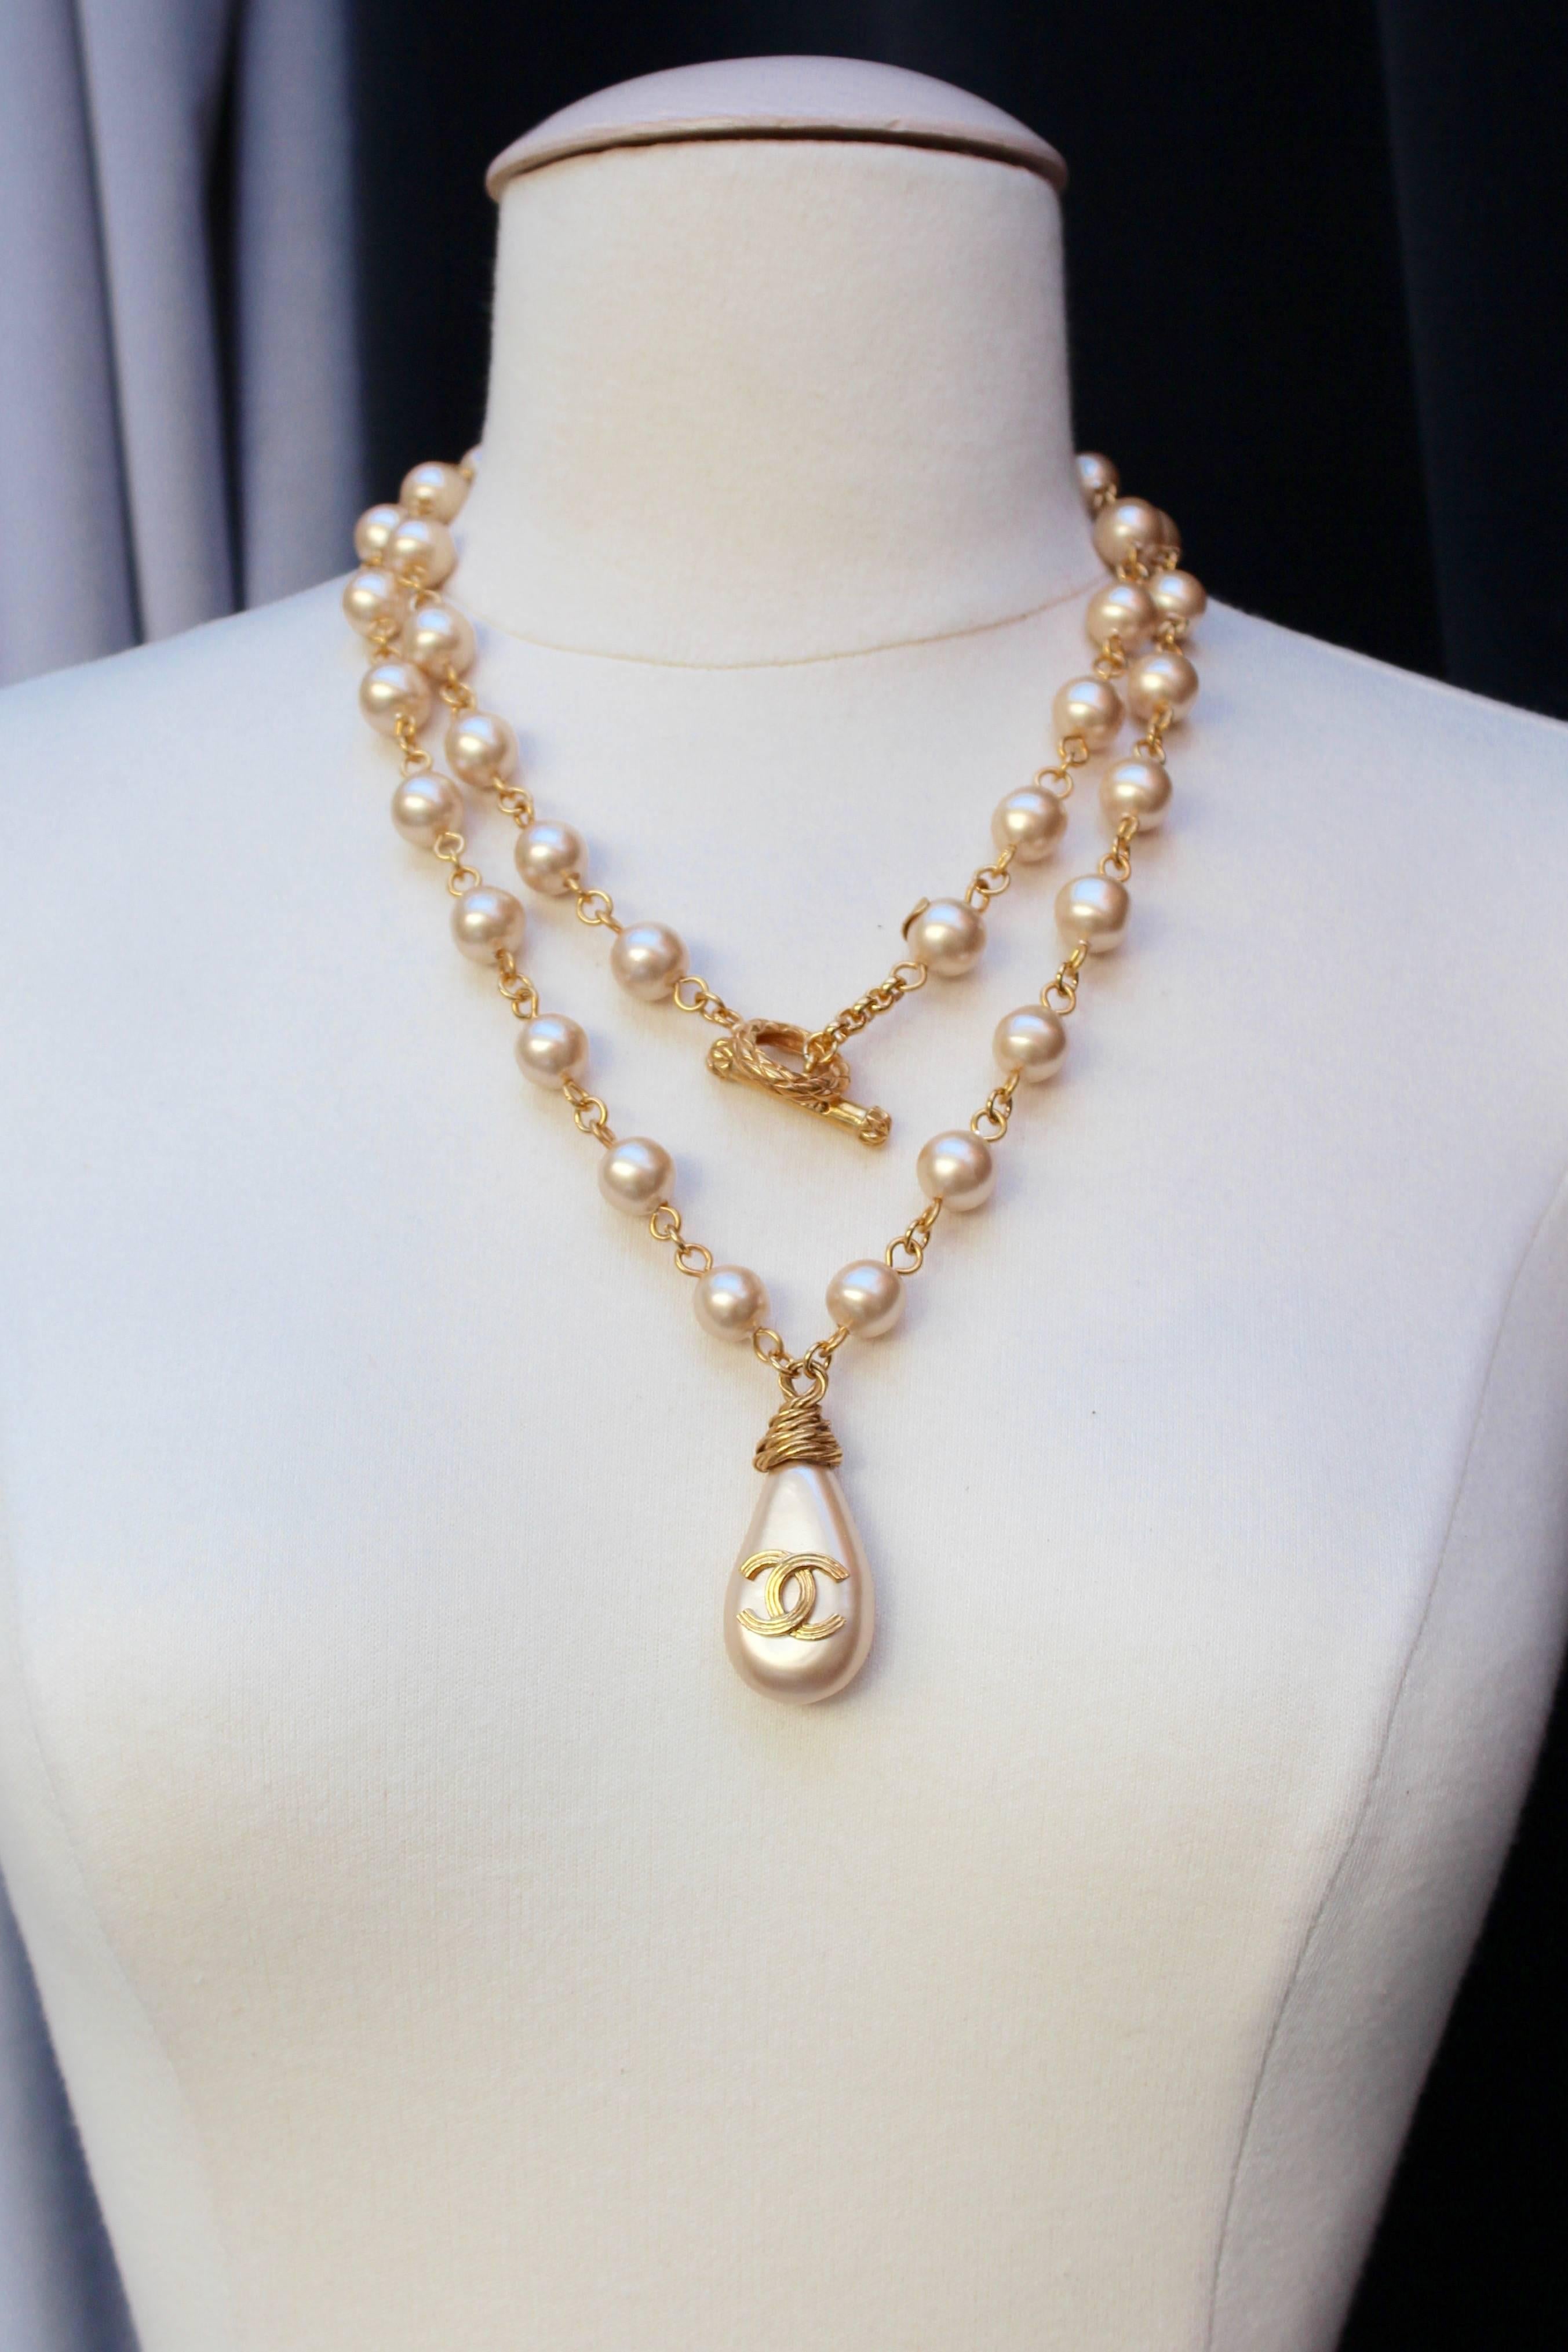 CHANEL (Made in France) Long necklace composed of pearly beads on gilded metal thick wire. It is further decorated with a pearly “calisson” topped with a gilded metal CC logo. It can be worn in one or two strands.

Hinge clasp stamped with the brand